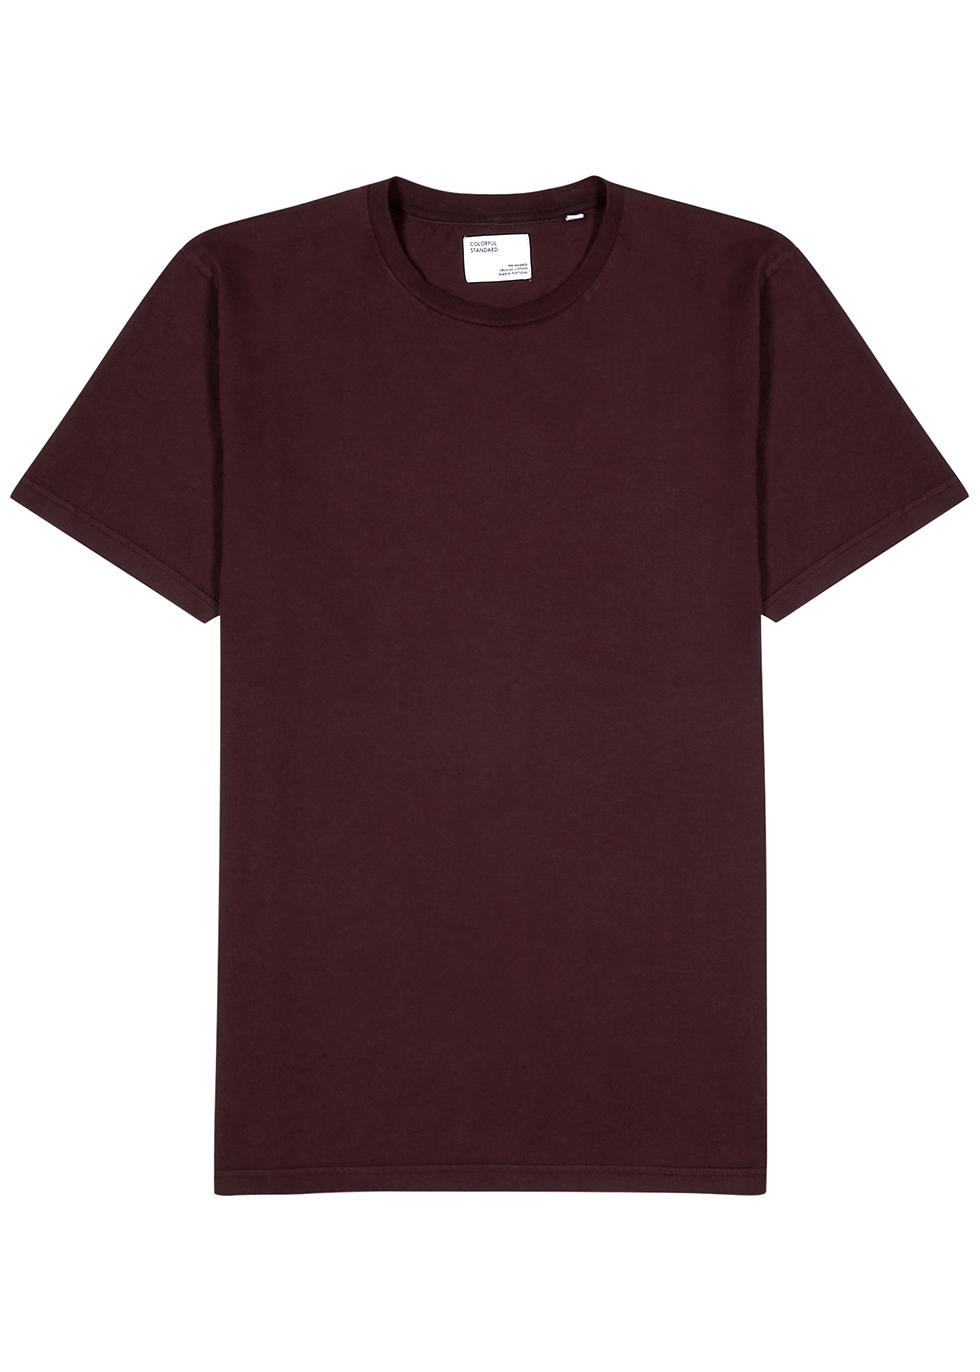 Burgundy cotton T-shirt by COLORFUL STANDARD